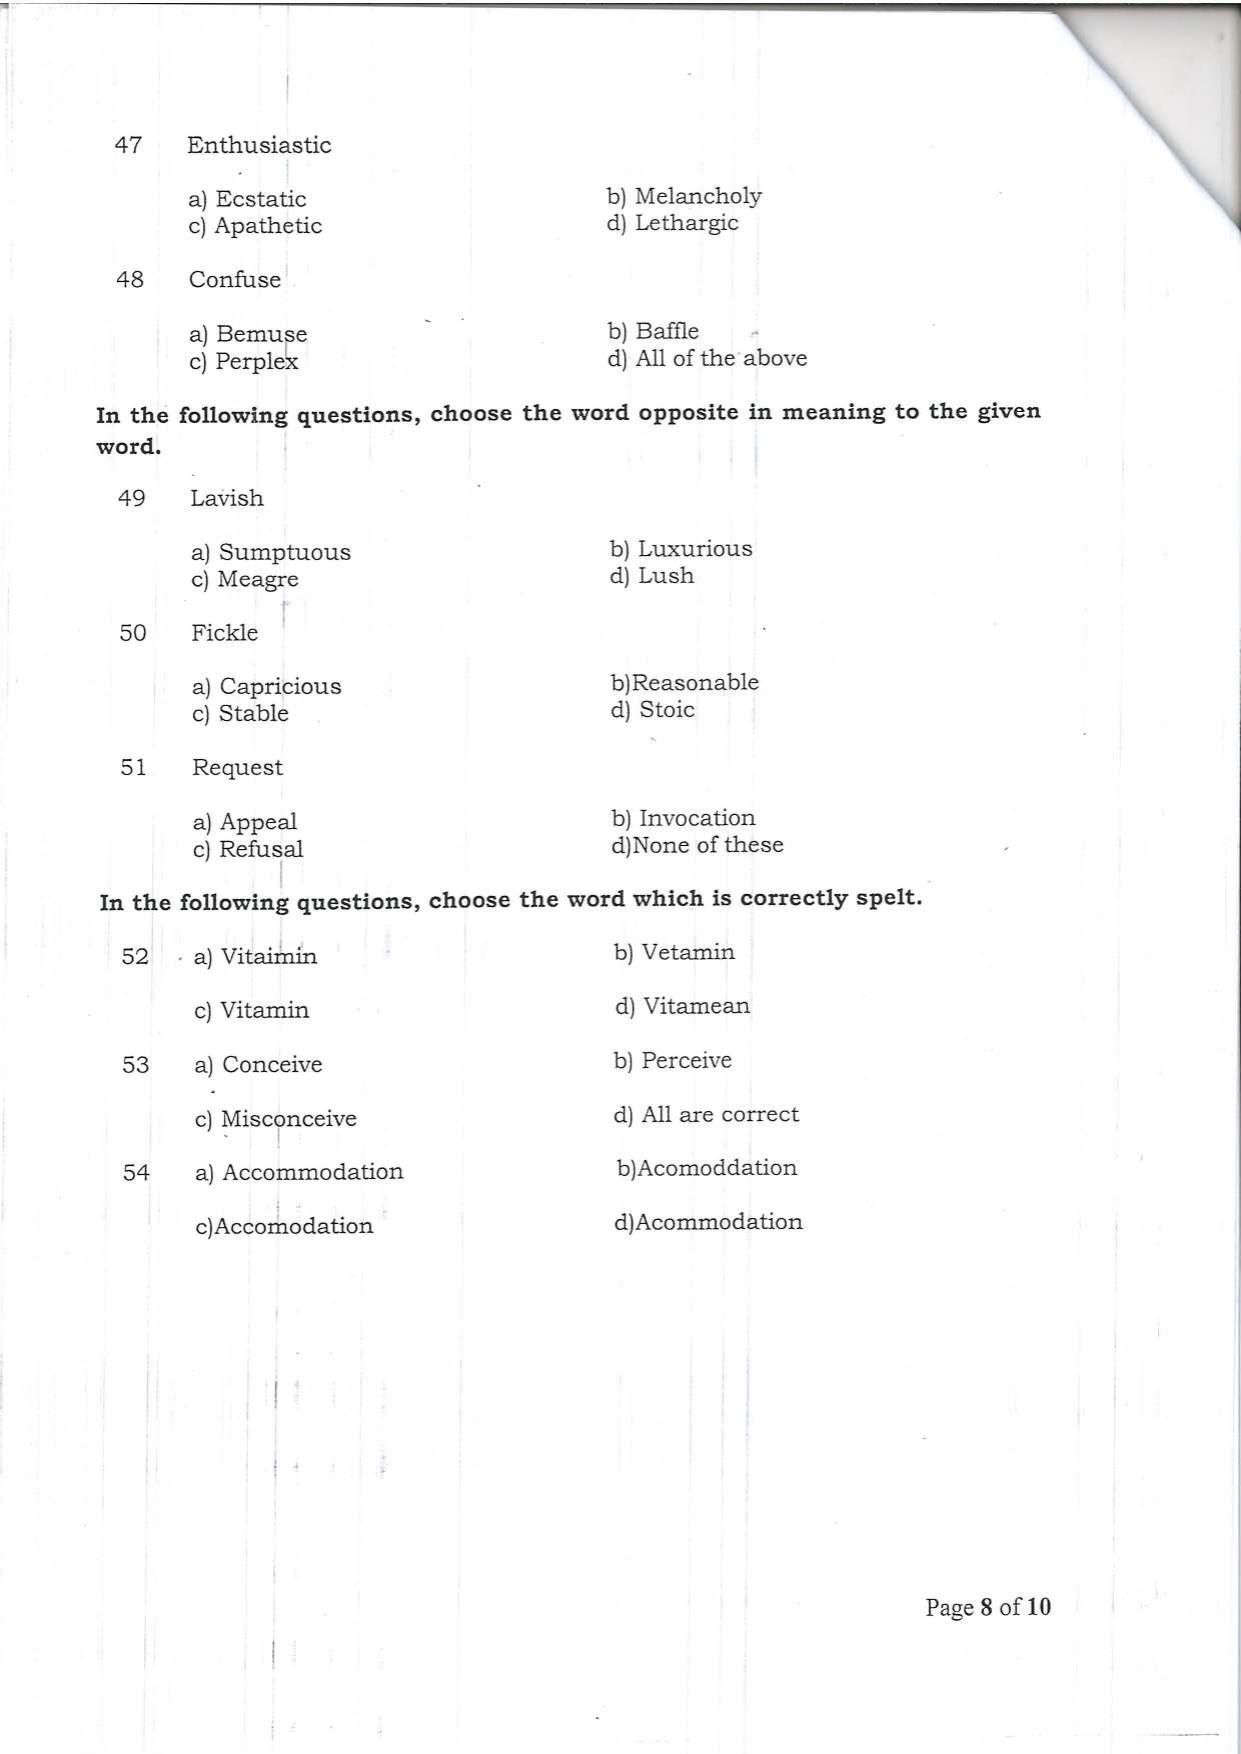 Question Paper of Office Assistant Grade III at BITM, Kolkata and NBSC, Siliguri (Advertisement No. 1/2022) - Page 8